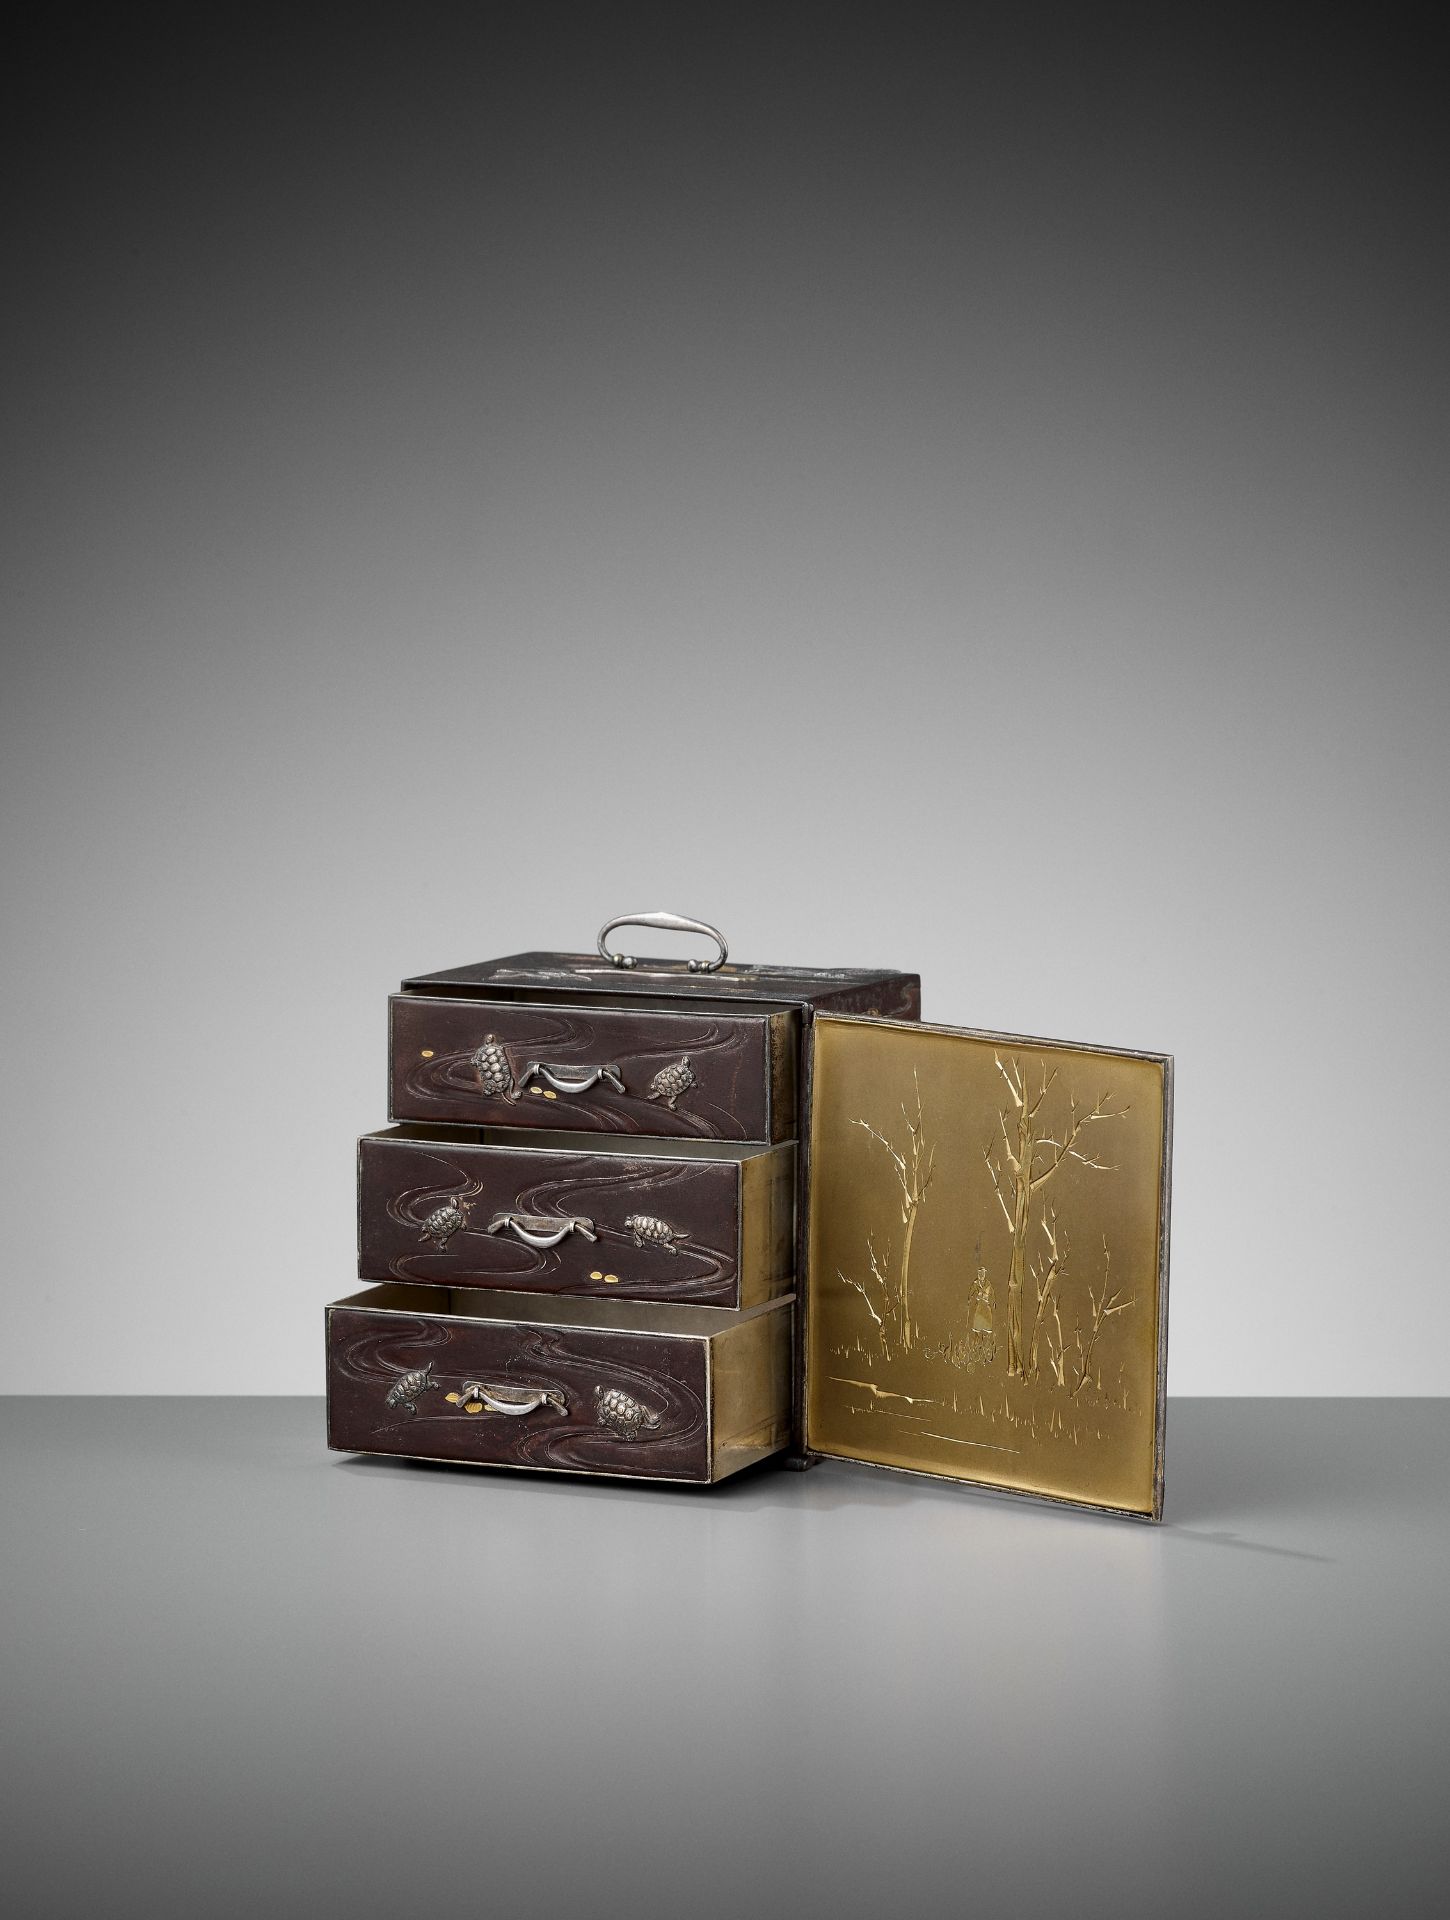 AN EXCEPTIONALLY RARE INLAID IRON MINIATURE KODANSU (CABINET) WITH TURTLES AND CRANES - Image 2 of 10